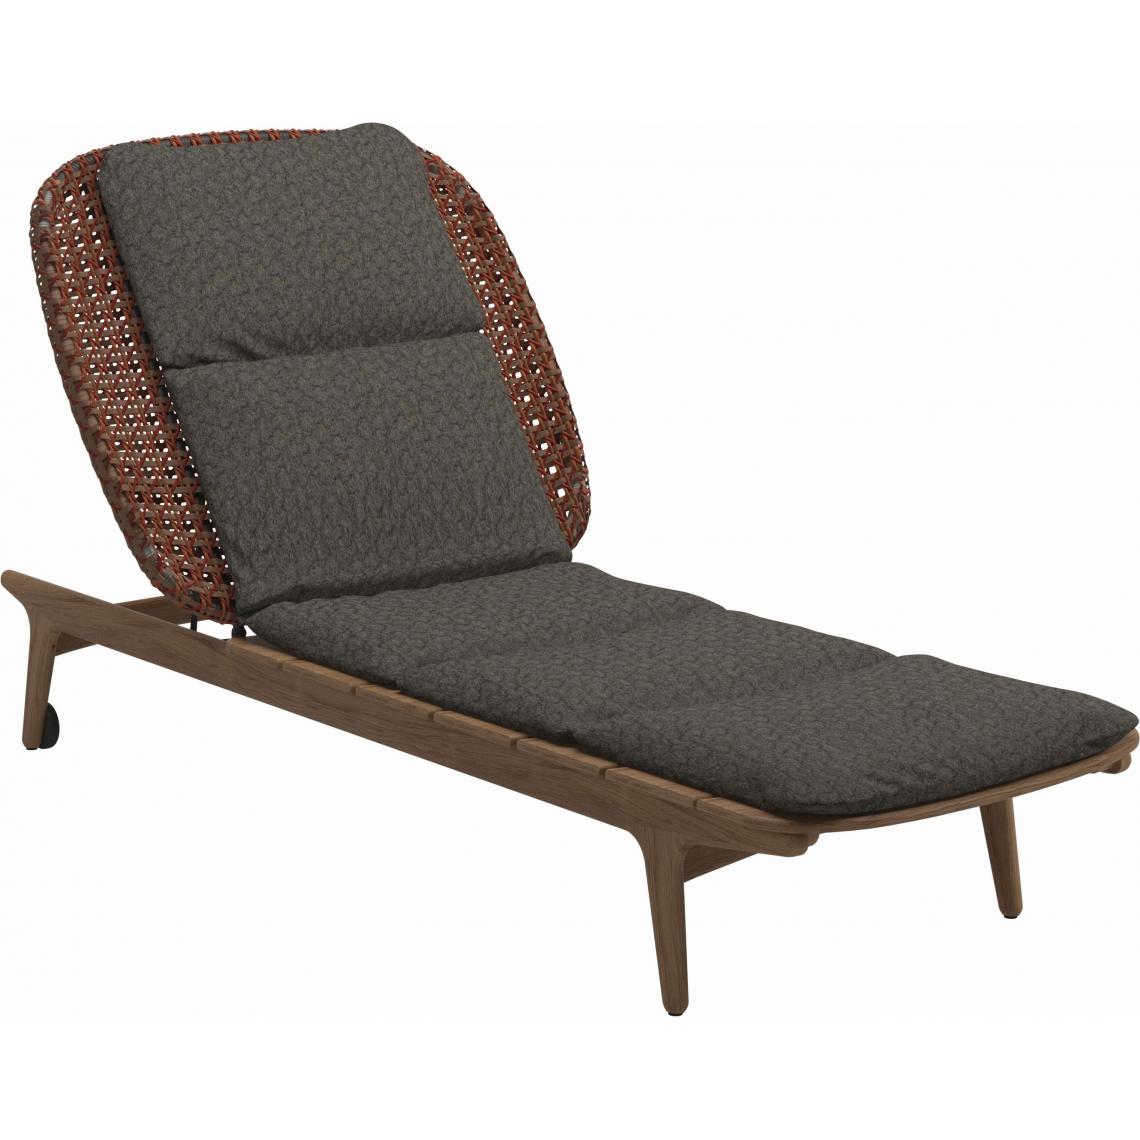 Gloster - Couchette Kay - Wave Quarry - GlosterCopperWicker - Chaises de jardin